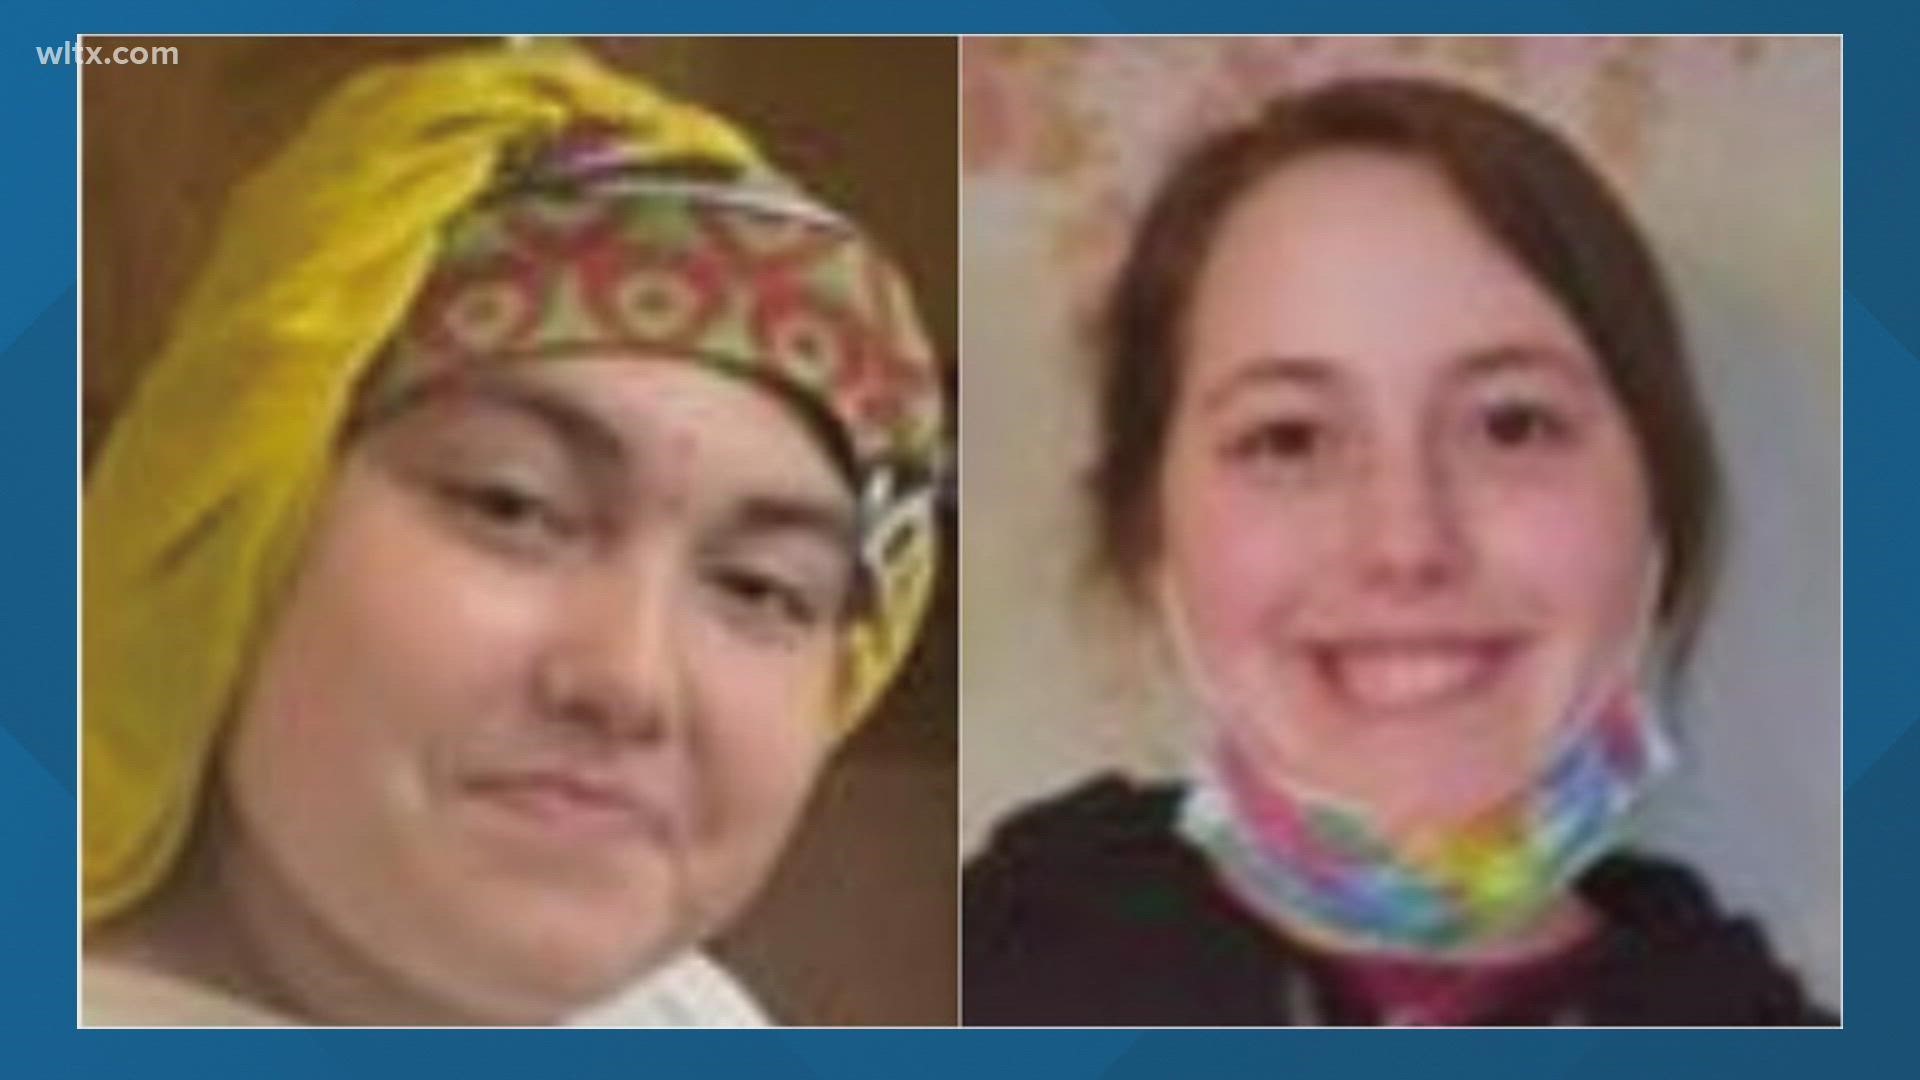 Police said the teens haven't been seen since around 4:15 p.m. on Saturday.